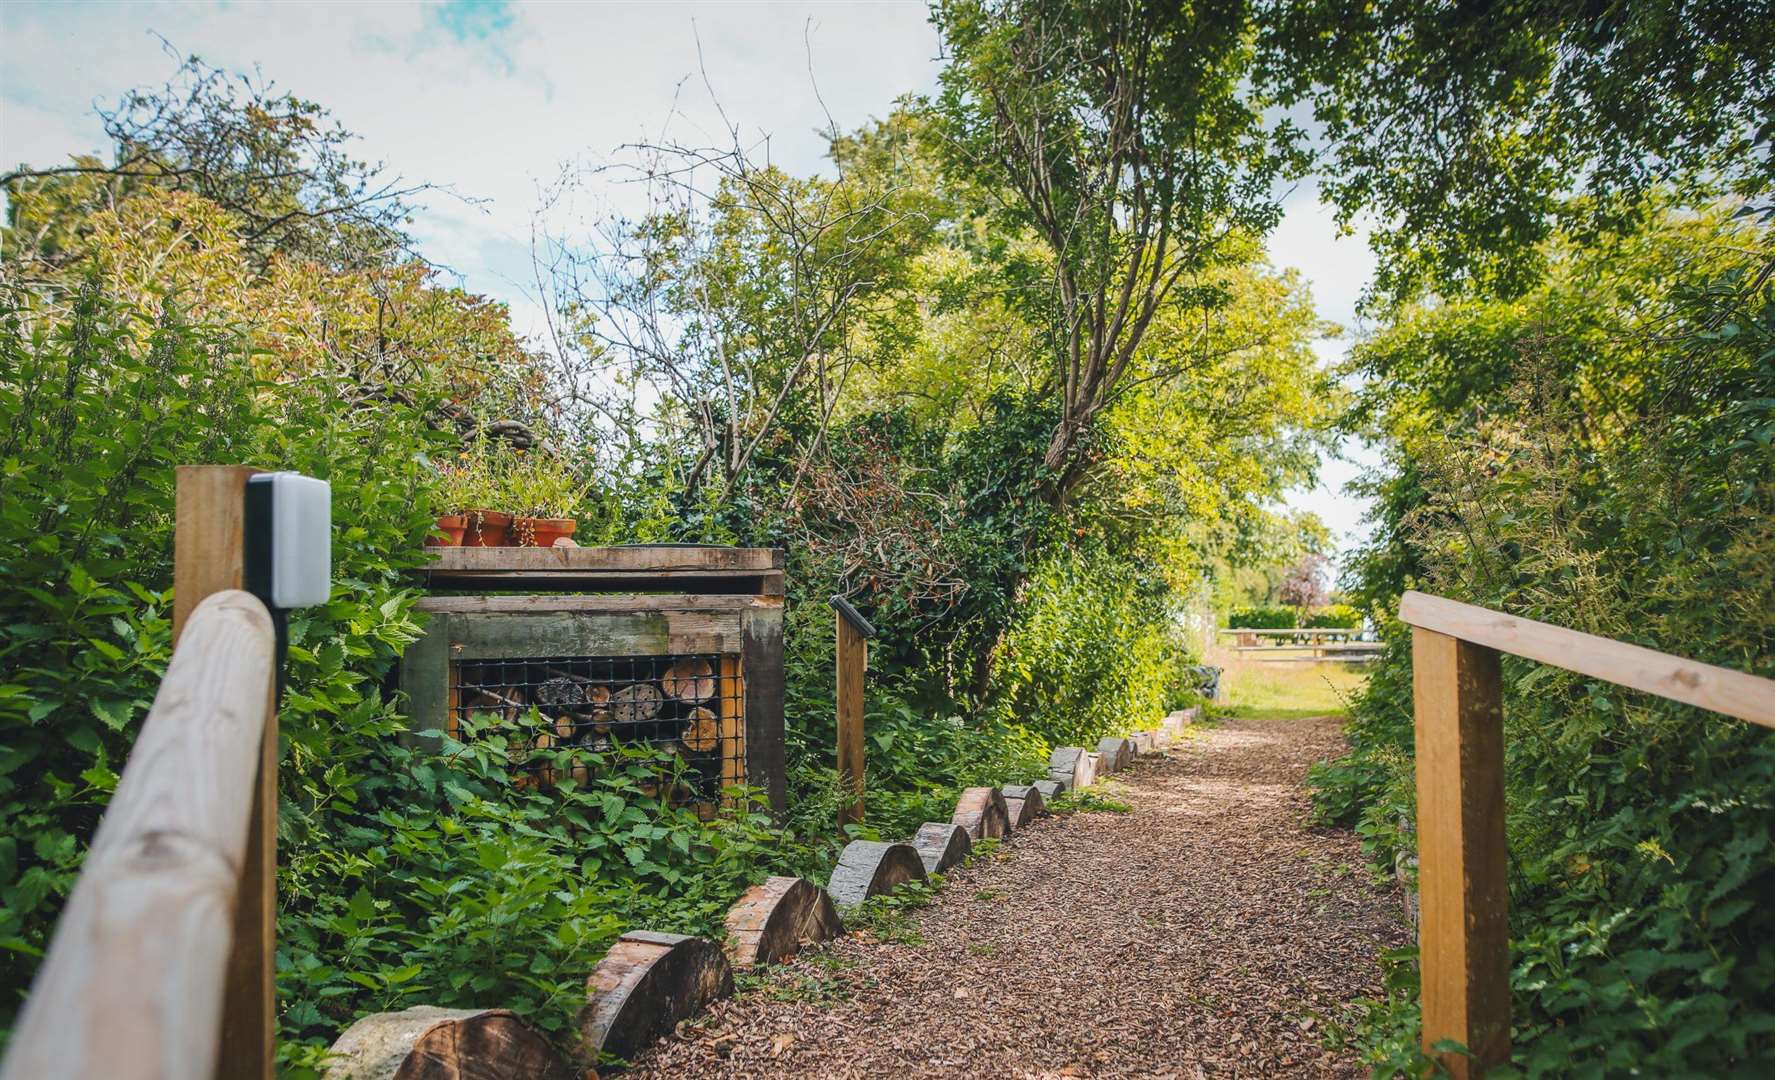 The beautiful campsite Hawthorn Farm is surrounded by gardens, orchards and woodland. Picture: Hawthorn Farm